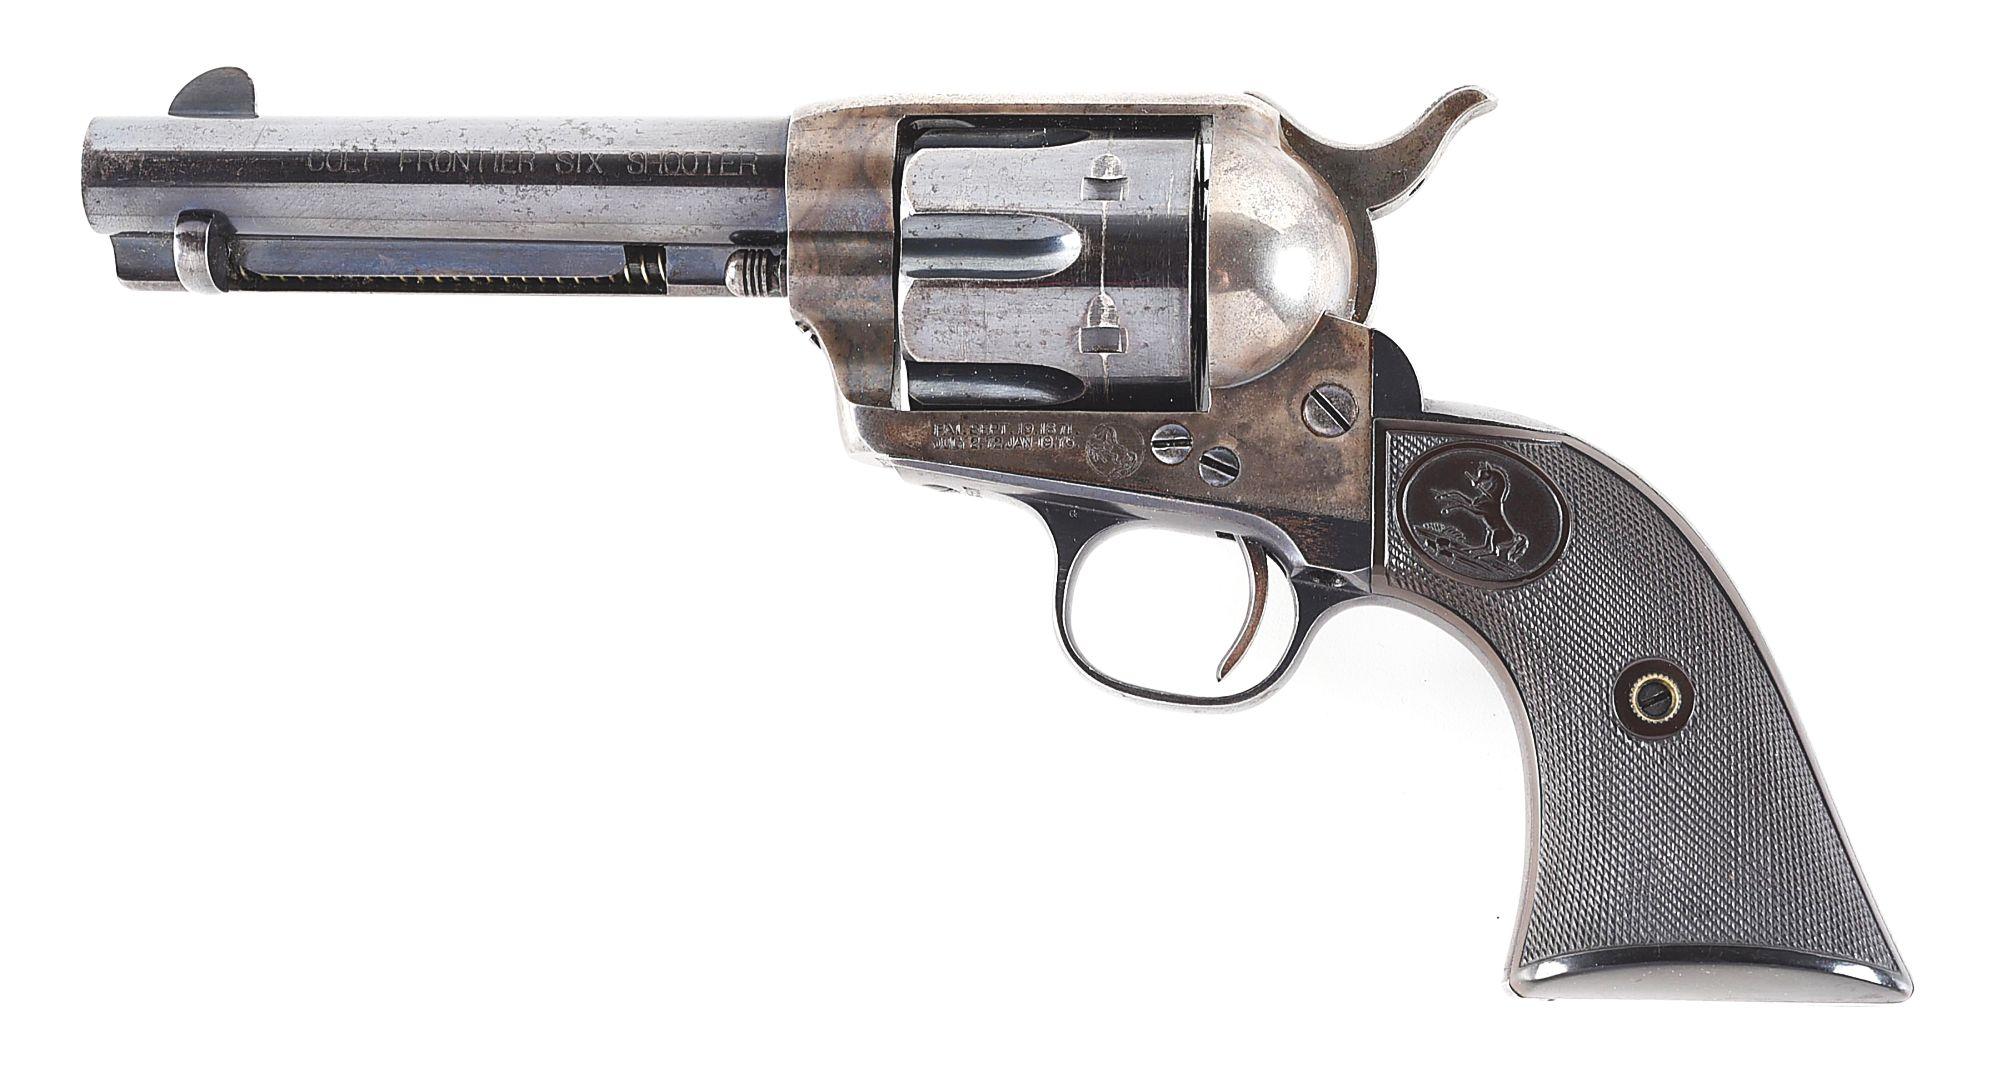 (A) DESIRABLE MONTANA SHIPPED COLT FRONTIER SIX SHOOTER SINGLE ACTION REVOLVER WITH FACTORY LETTER.